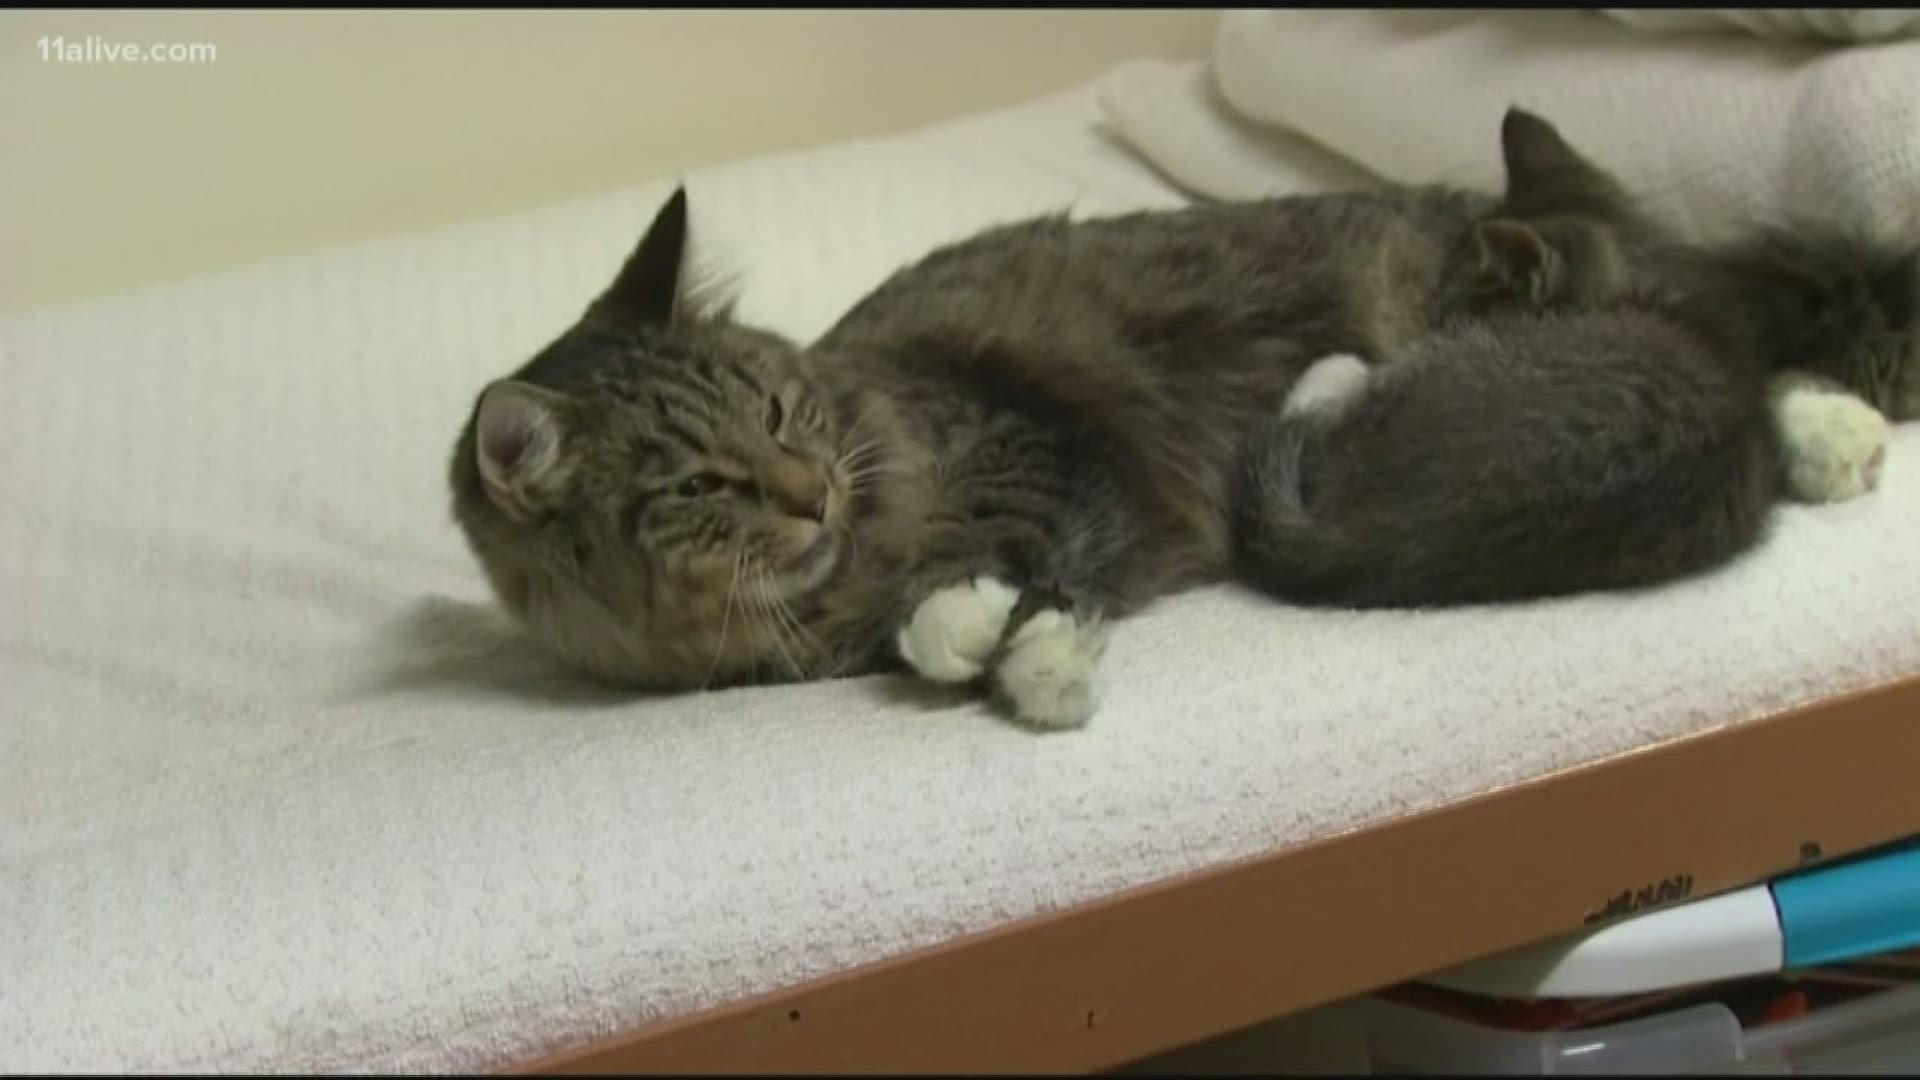 New York lawmakers have voted to ban declawing, a measure already widespread in Europe. Critics and animal advocates say the practice is painful and cruel.